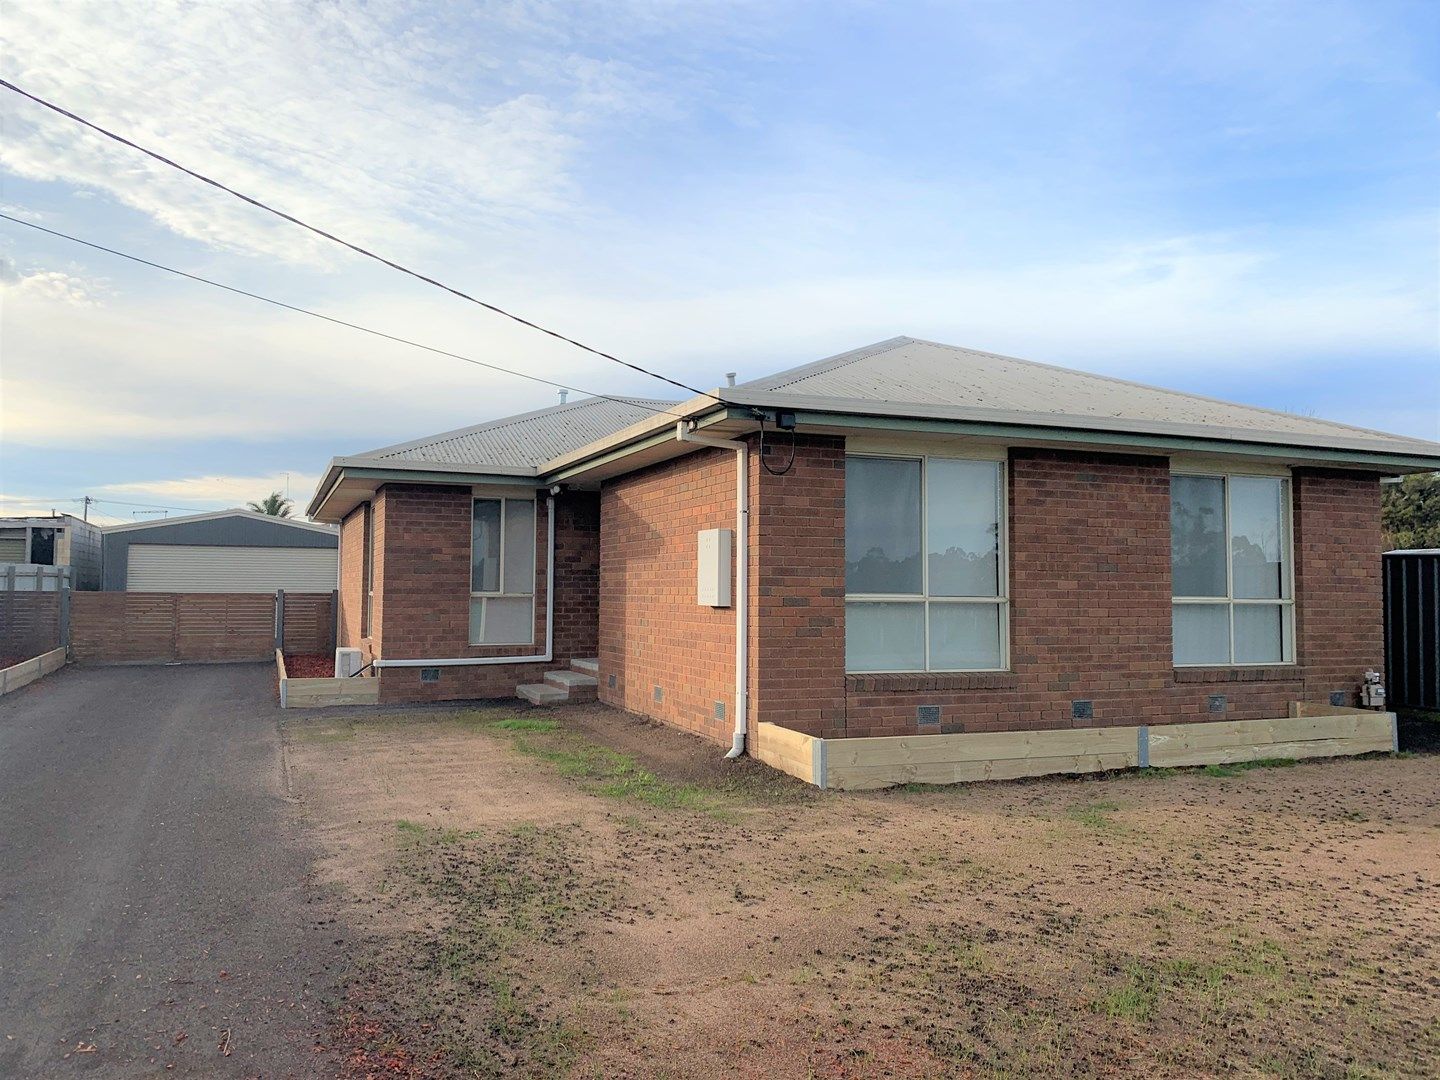 3 bedrooms House in 174 Cants Road COLAC VIC, 3250